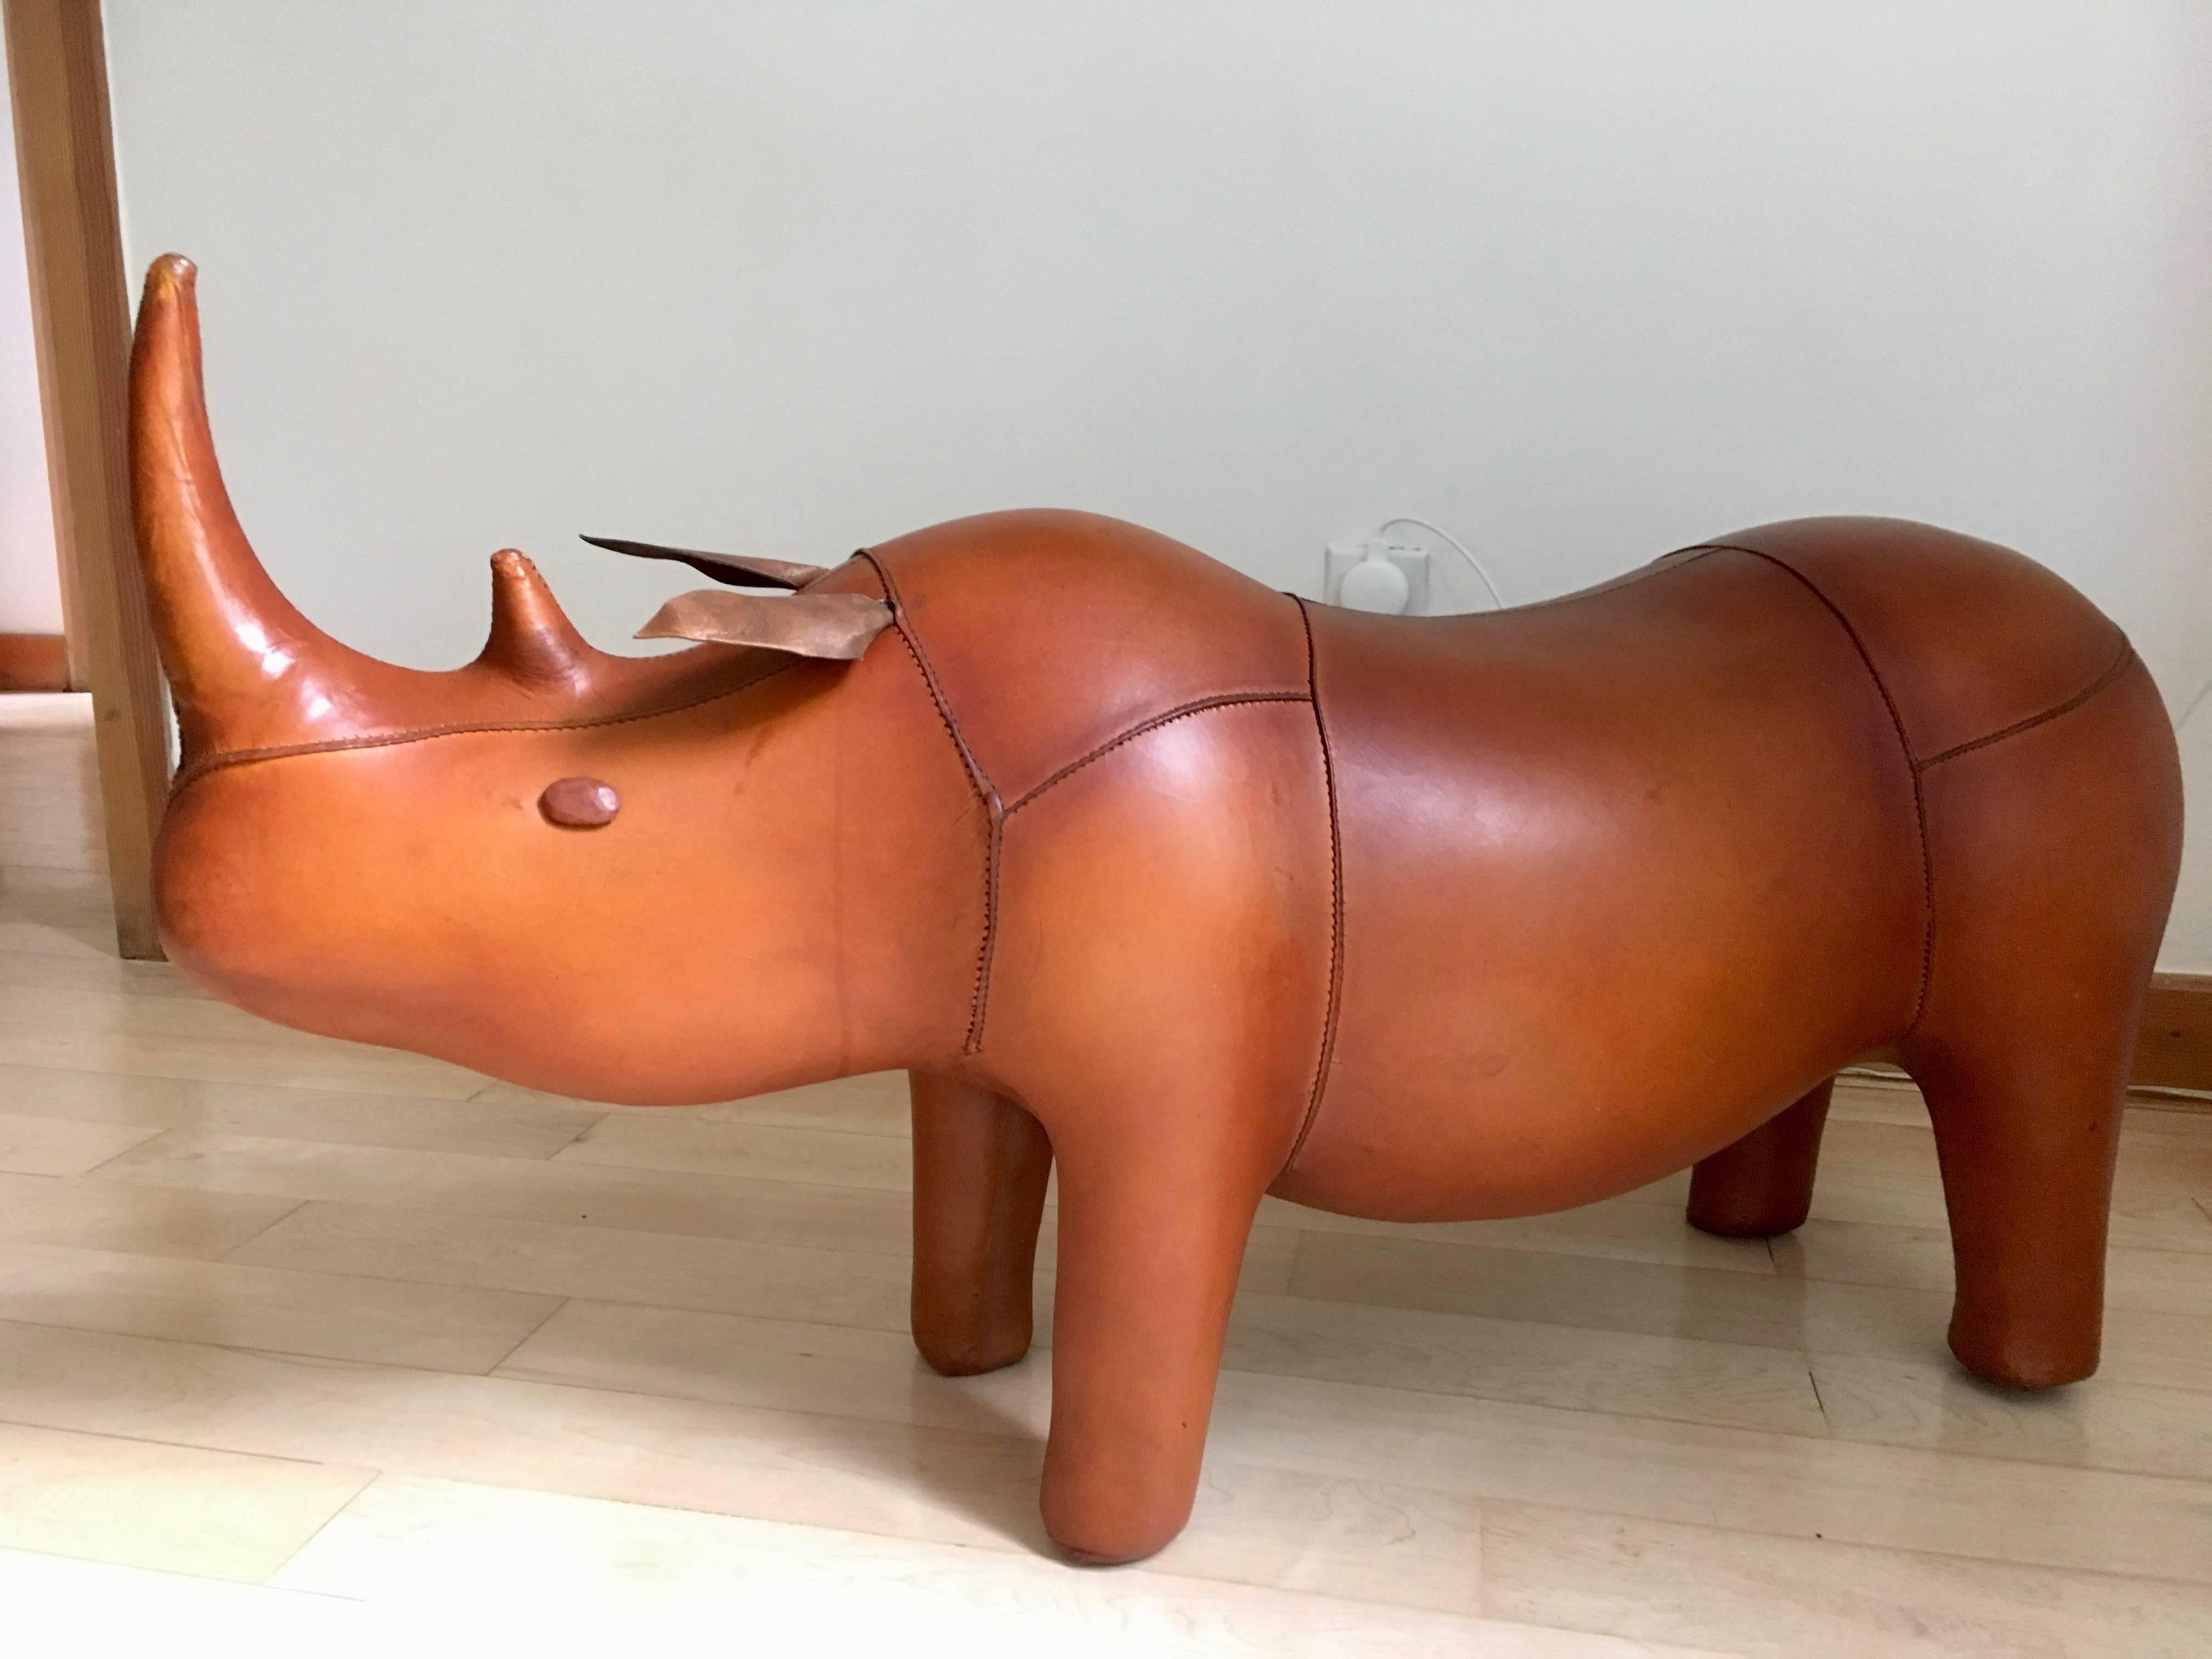 Handsome leather rhinoceros by Omersa. Very sturdy stool or footstool. Also a great sculptural object. Beautiful patina to leather. Excellent condition.